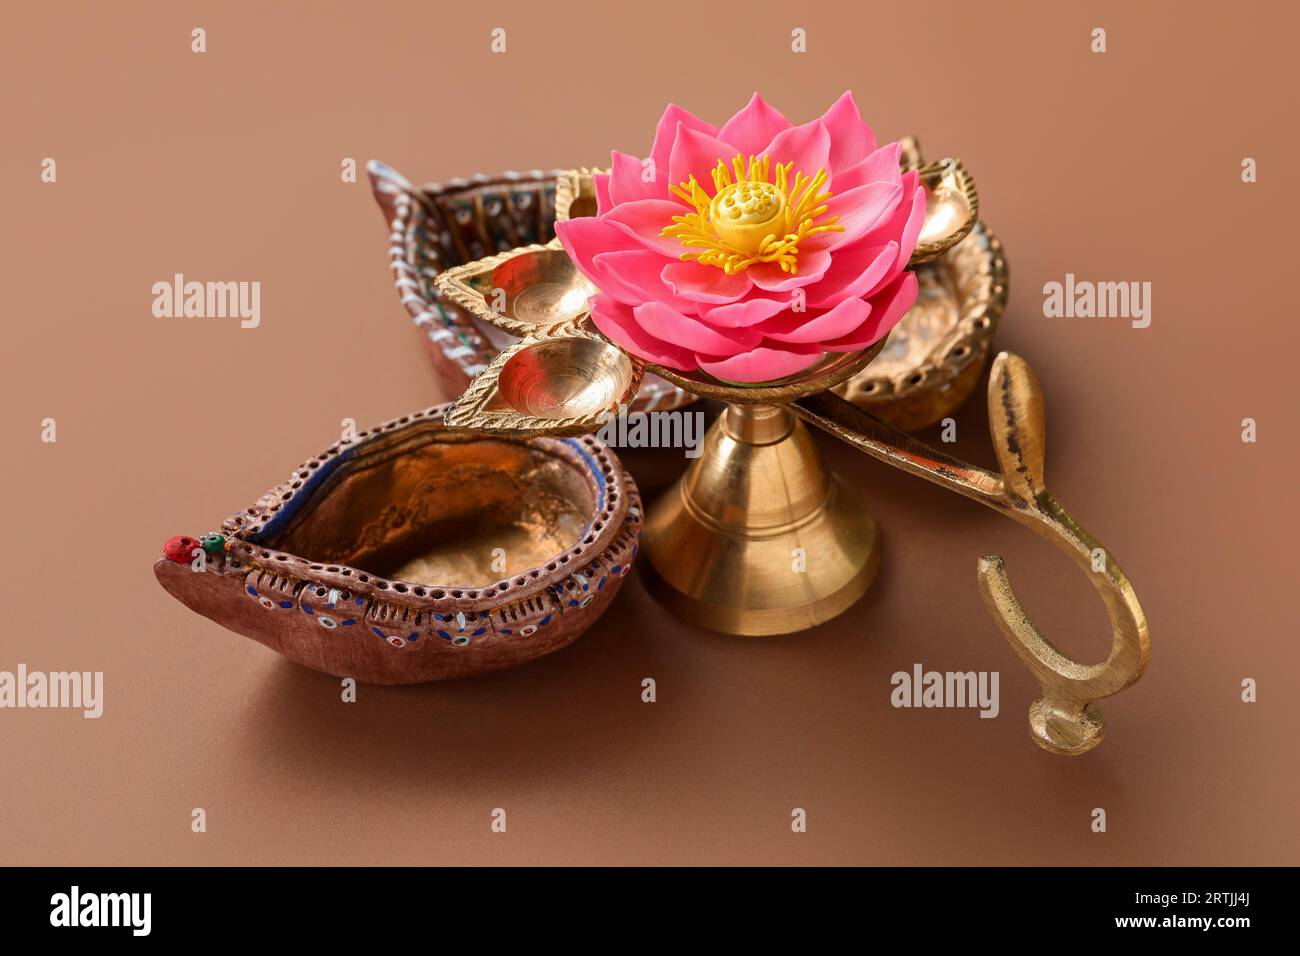 Diya lamps with lotus flower for celebration of Divaly on brown background Stock Photo